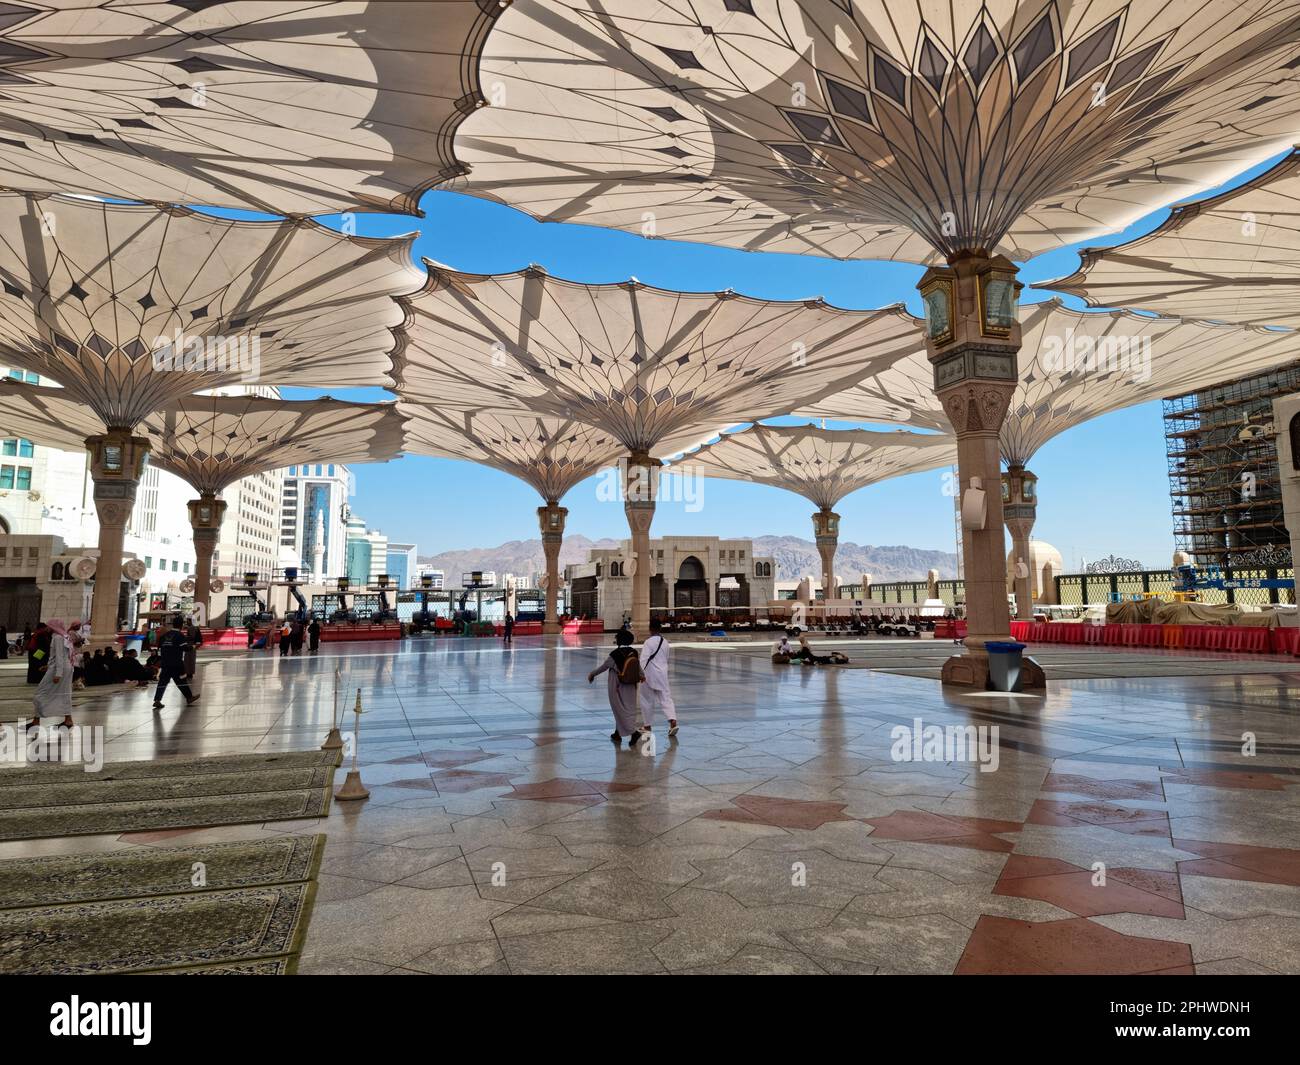 Madinah, Saudi Arabia - February 25, 2023: Muslim pilgrims visiting the beautiful An-Nabawi Mosque, the Prophet mosque which has great architecture du Stock Photo